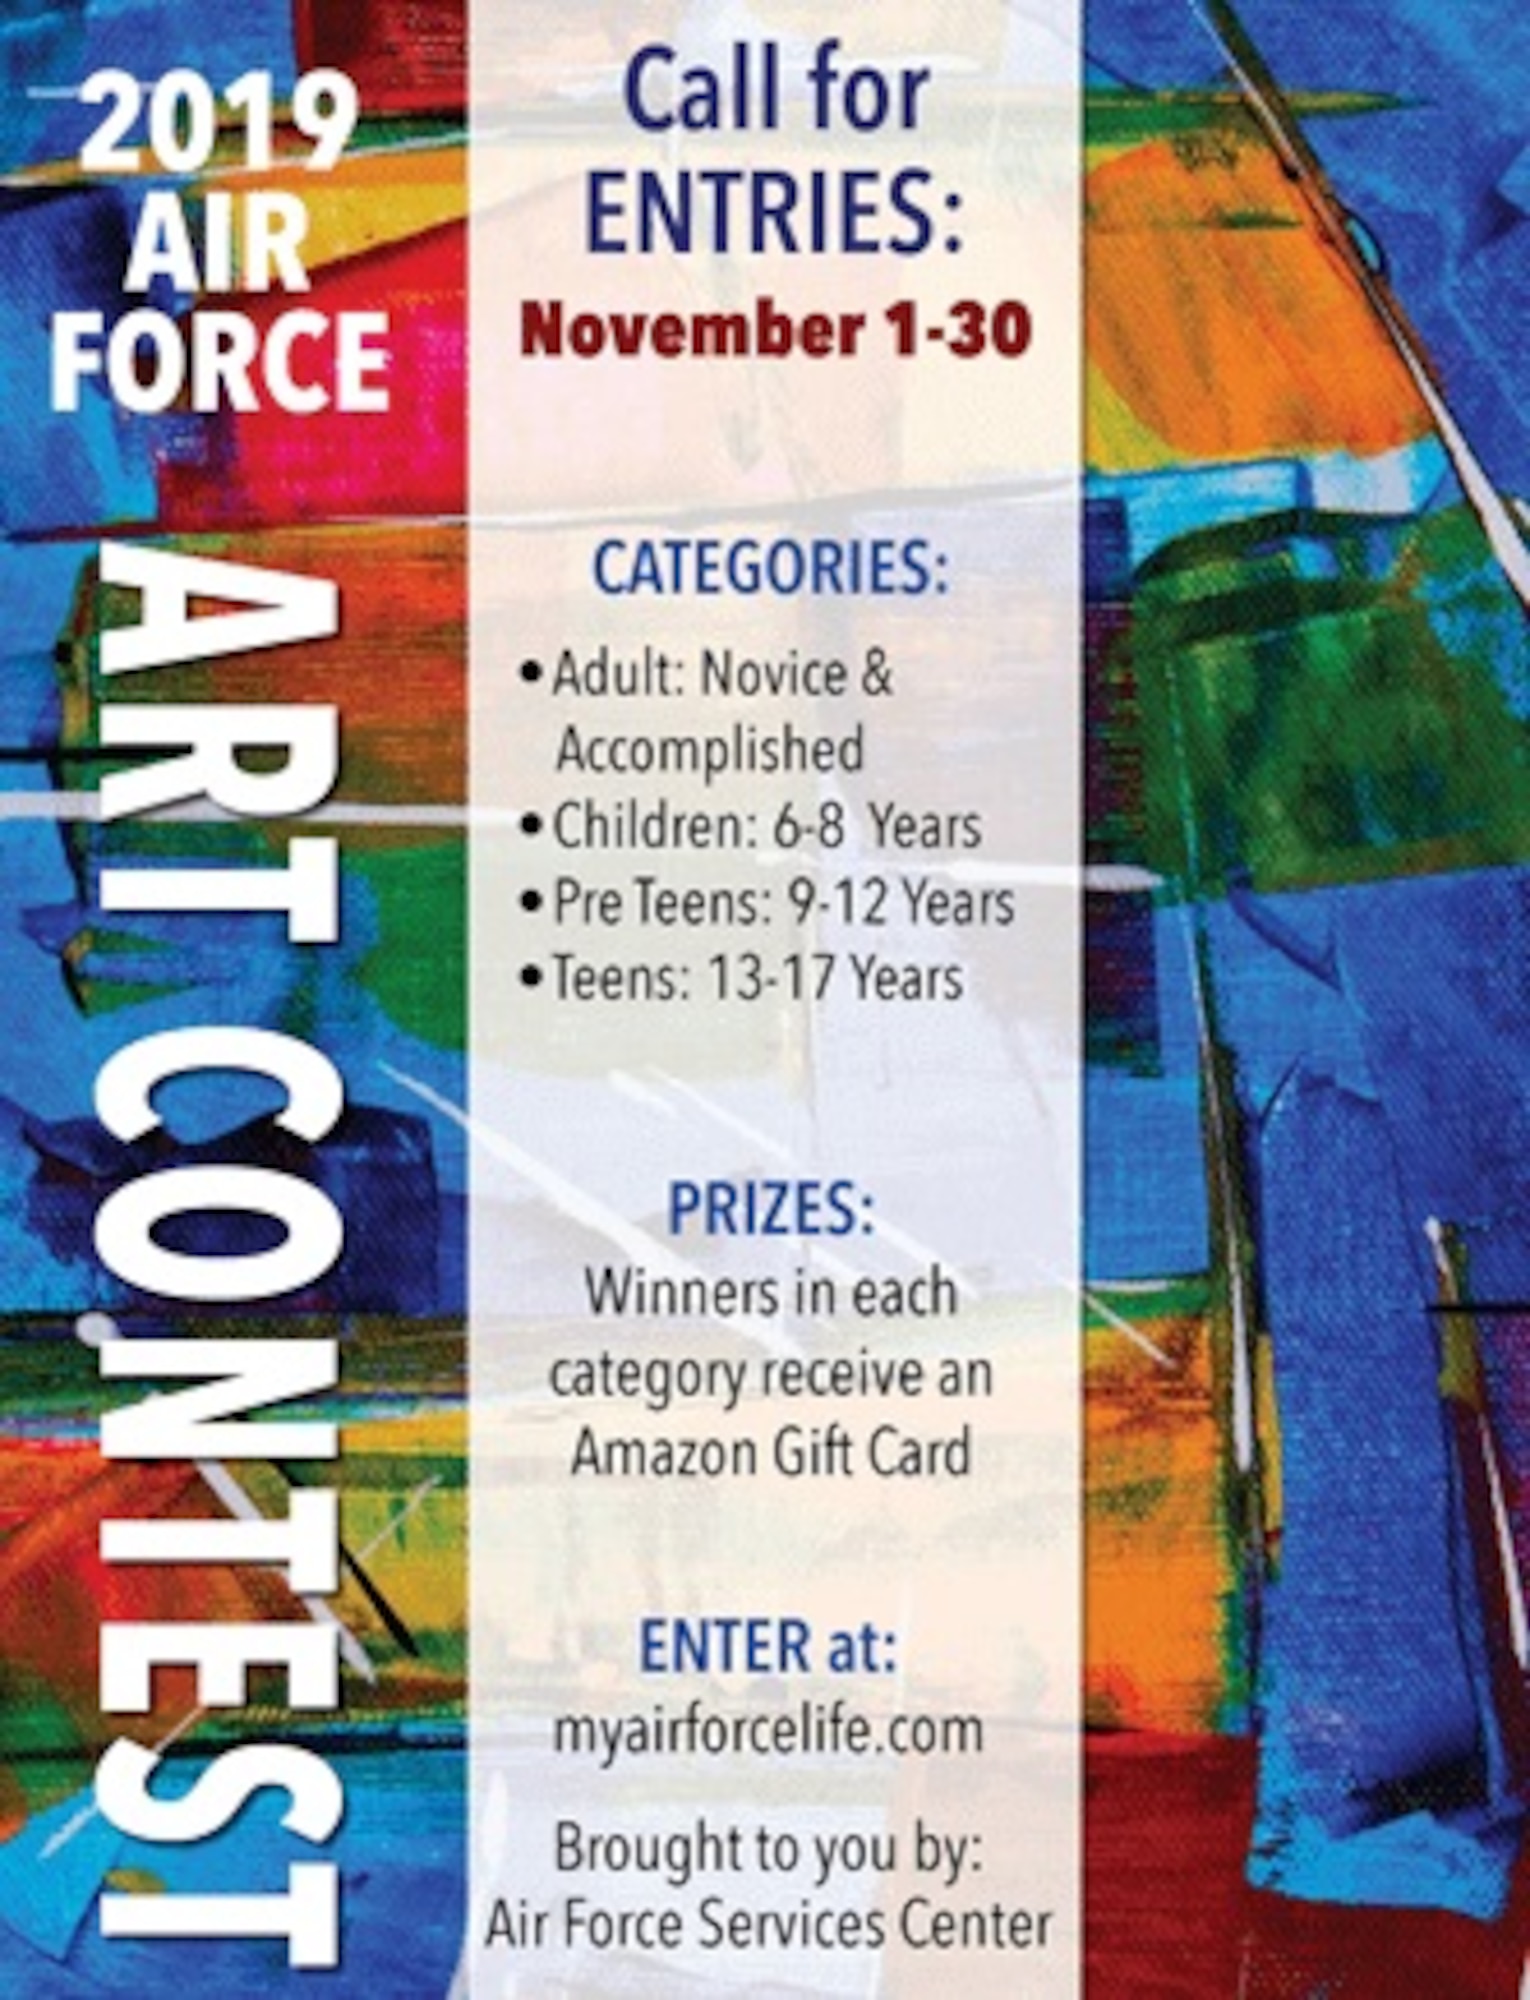 The contest, part of the Air Force’s arts and crafts program managed by AFSVC, runs through Nov. 30, and is open to all authorized patrons of Air Force morale, welfare and recreation programs.